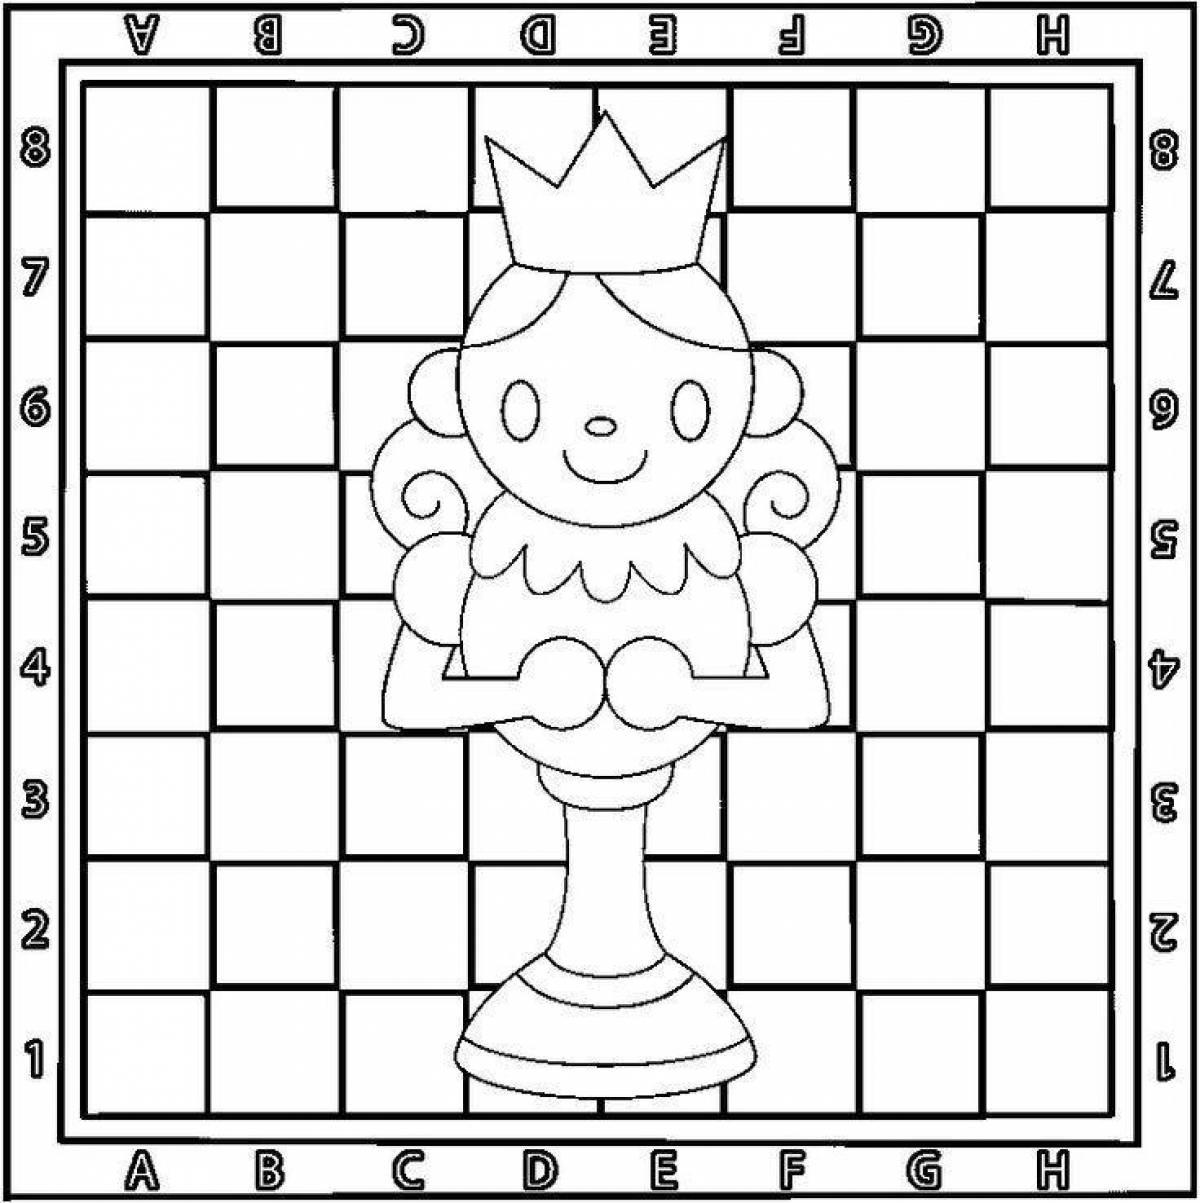 Inspirational chess coloring book